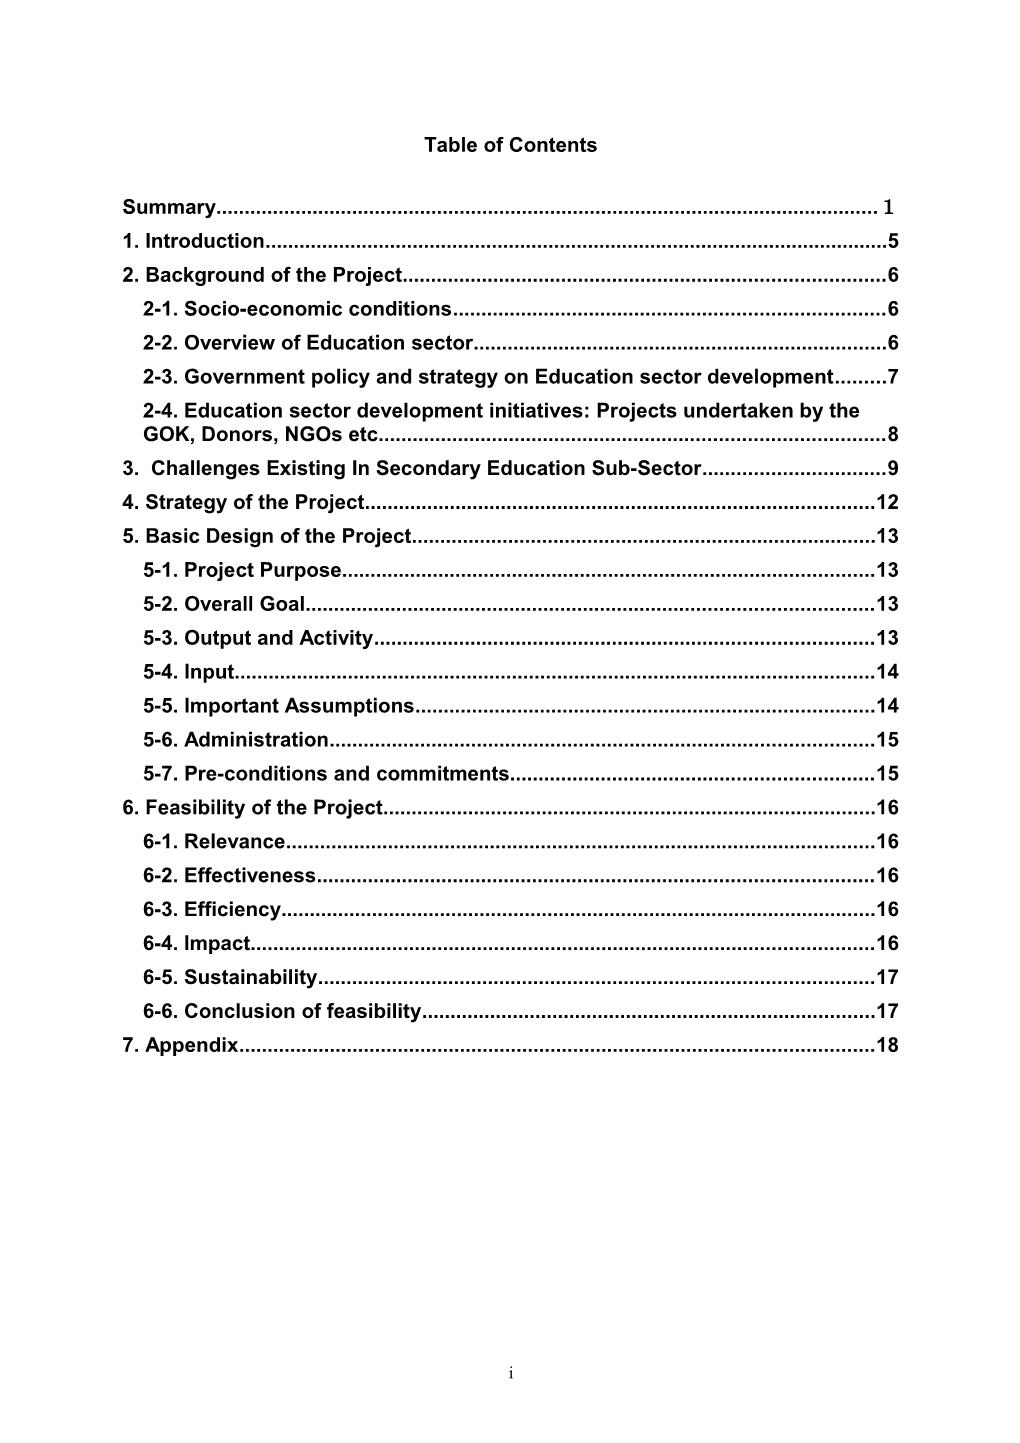 Project Document for 2Nd Phase of SMASSE Project